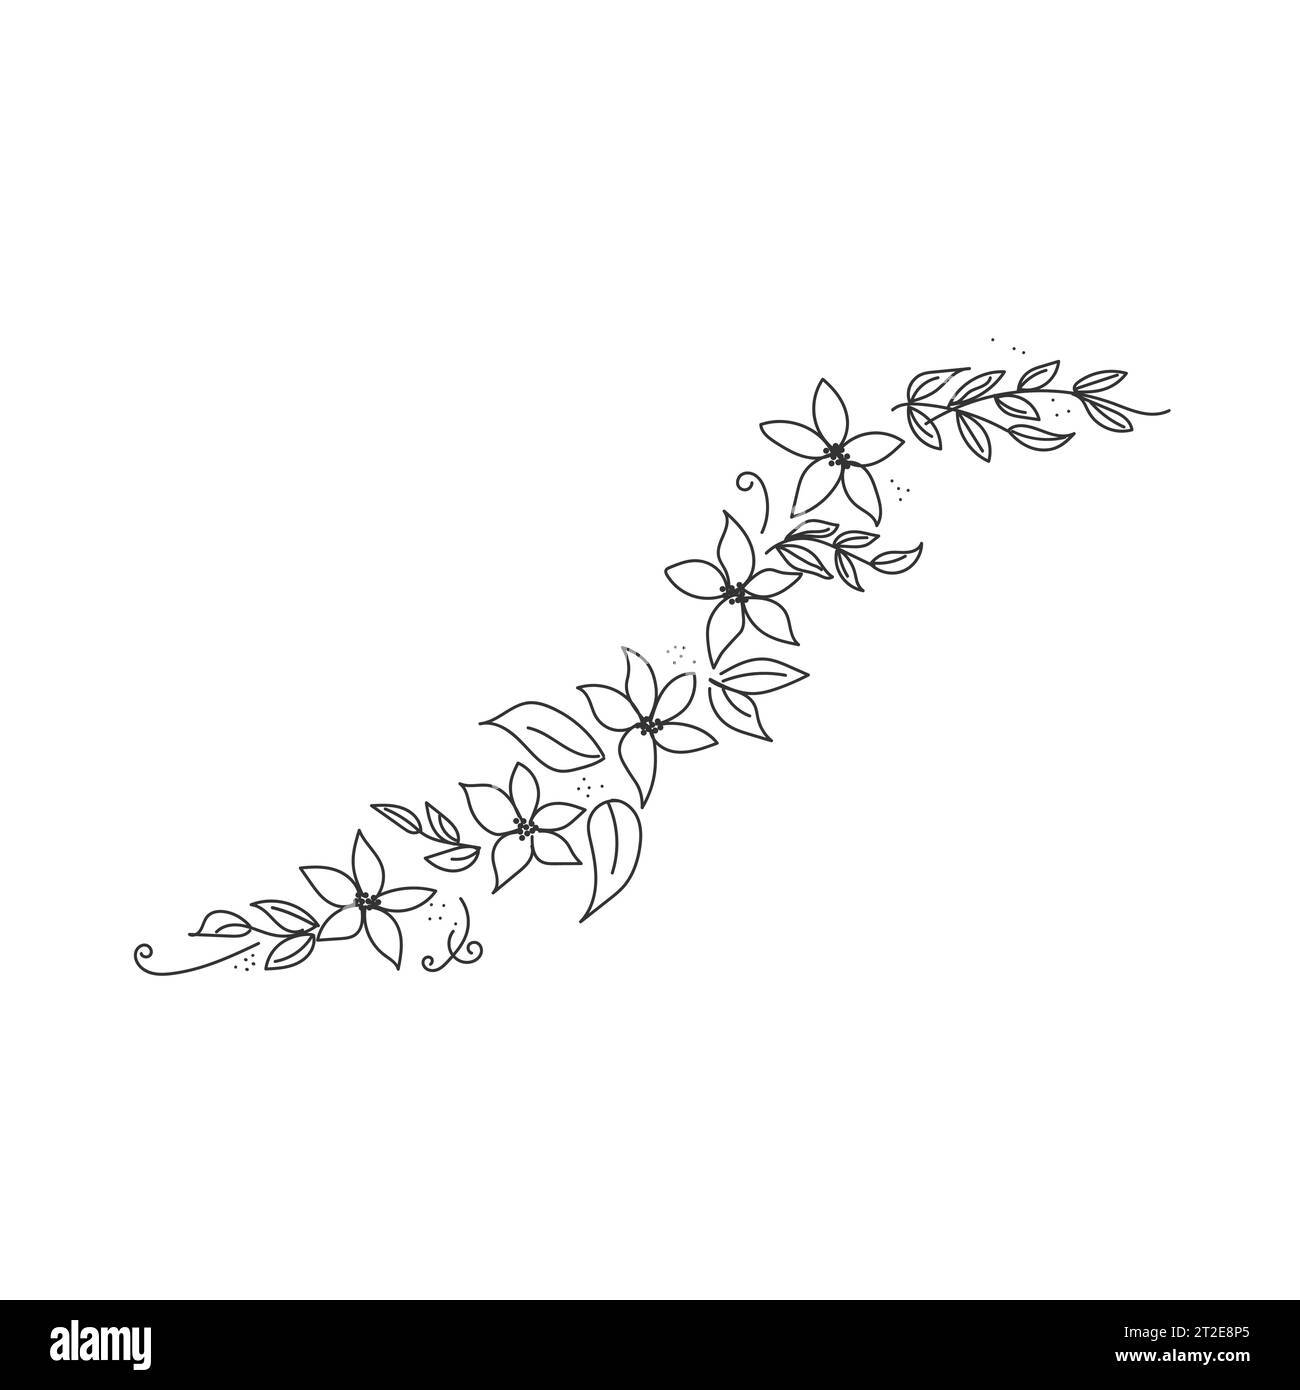 Ornament with stylized flowers and leaves in black lines. Isolated on white background. Graphic decor. Vector illustration Stock Vector